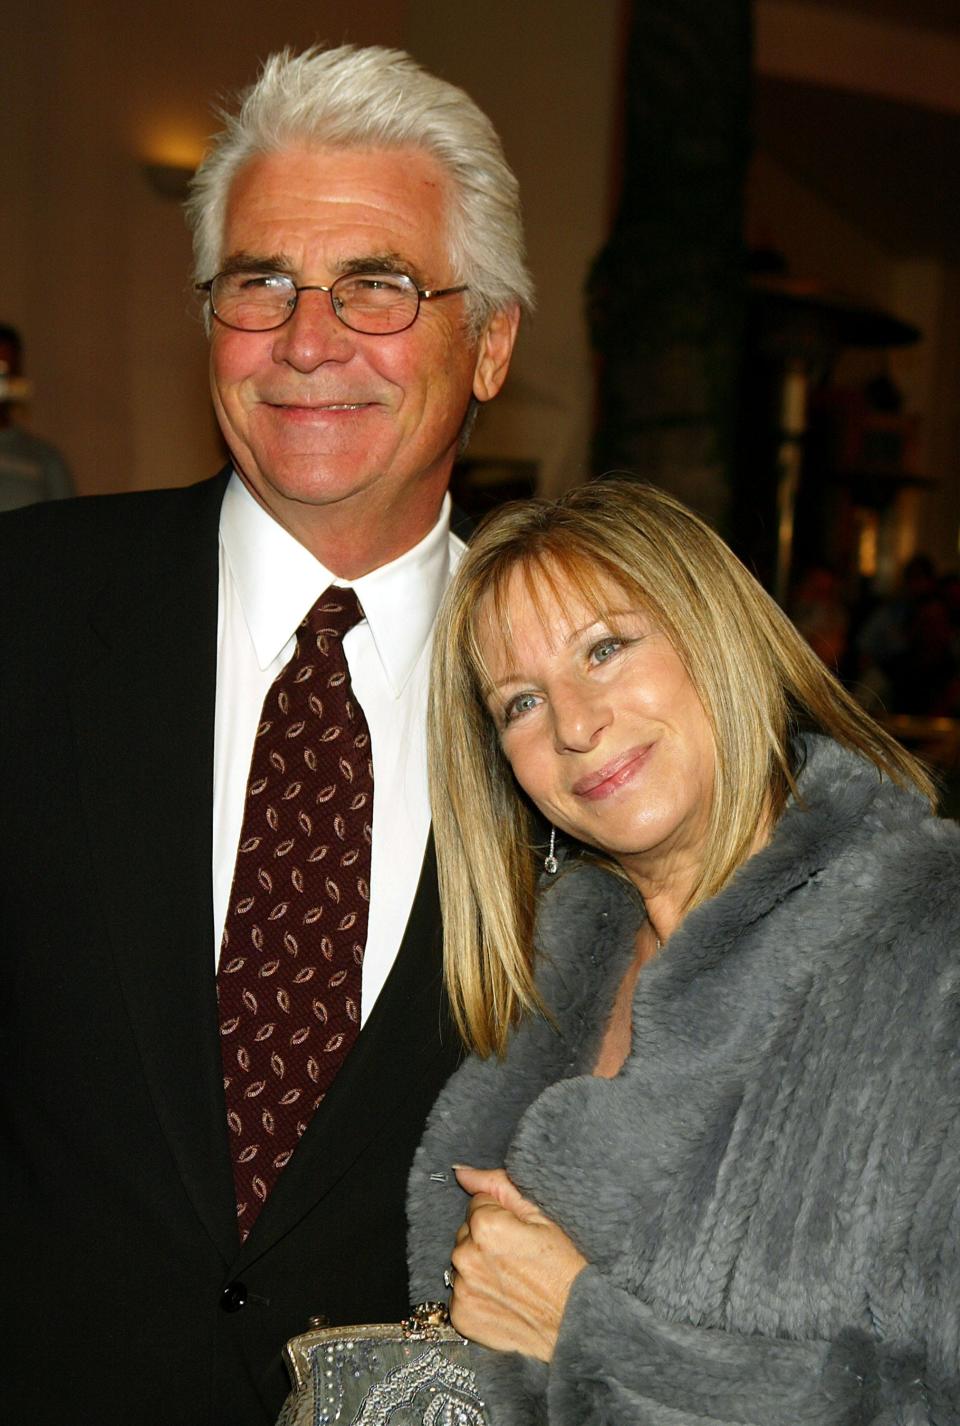 James Brolin, in a black suit, white shirt, red tie, and glasses, poses with Barbra Streisand, in a gray fur coat.